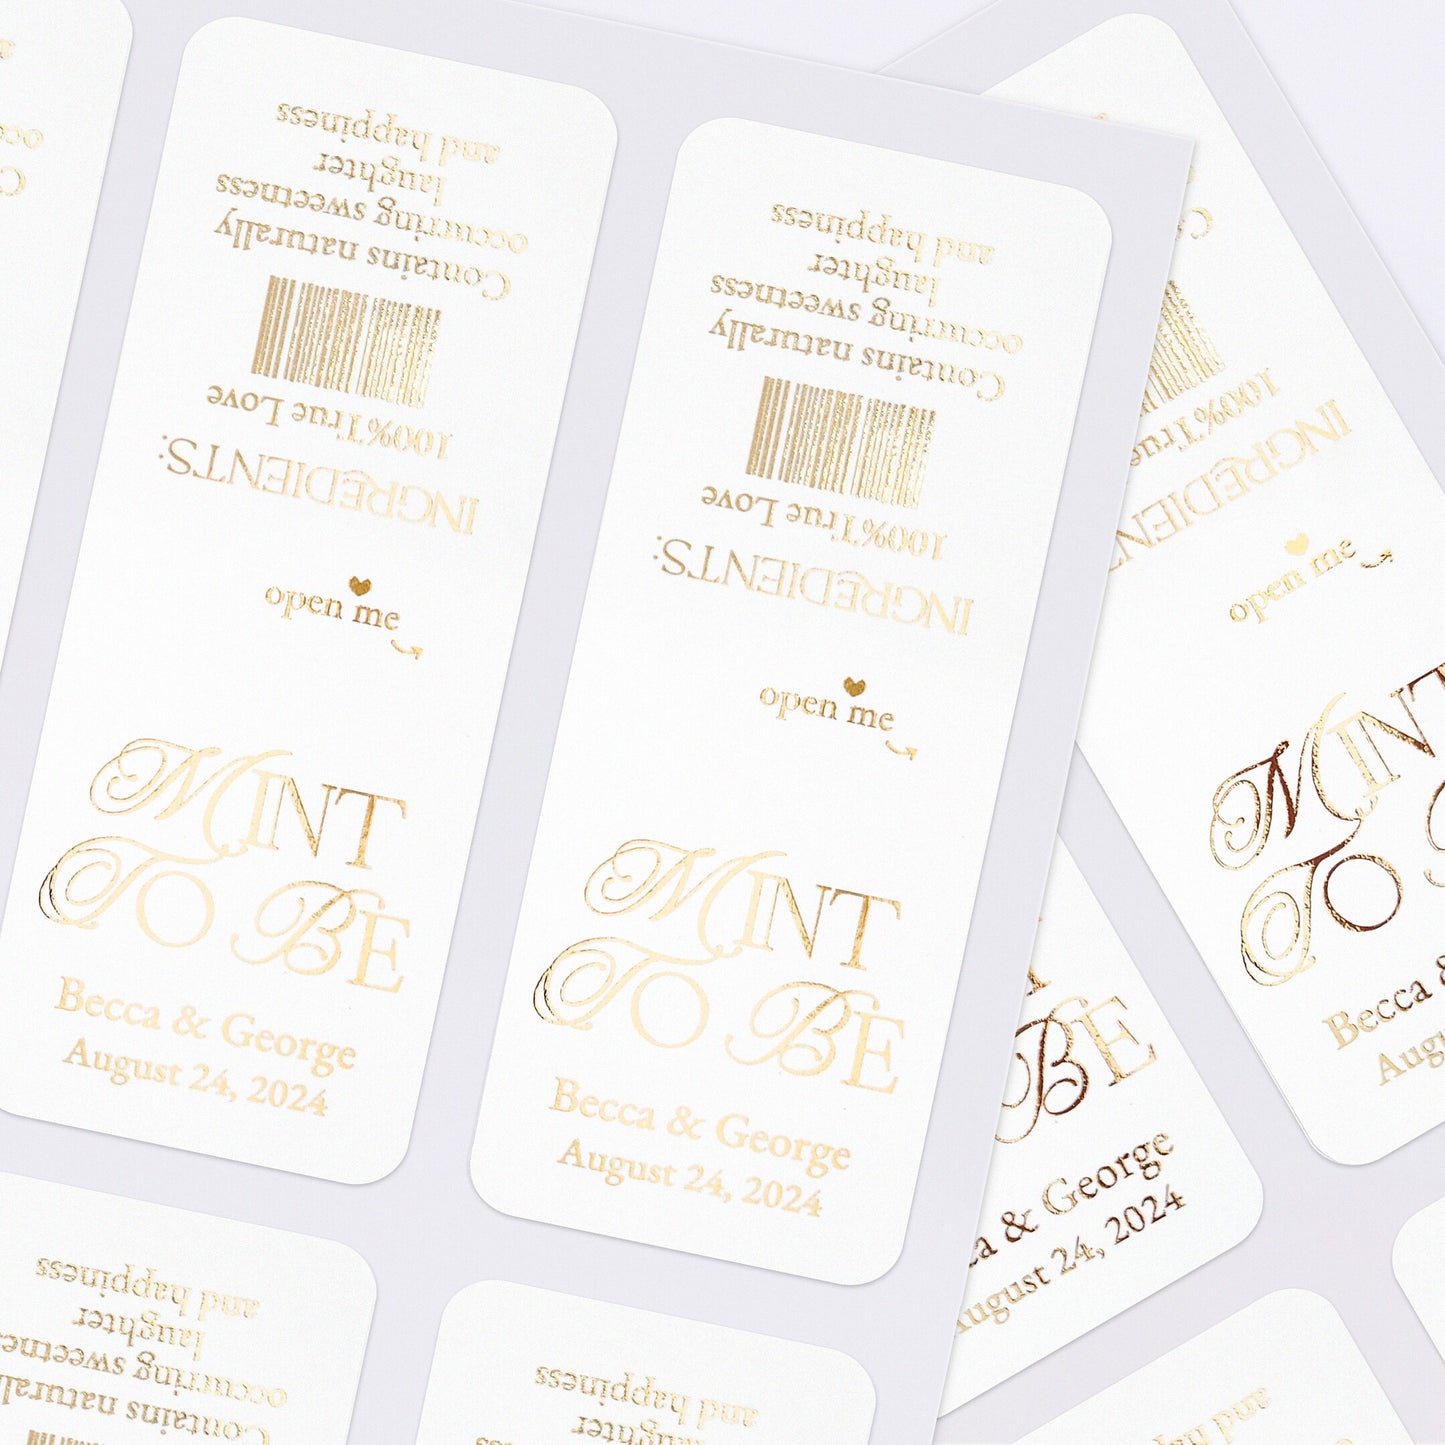 Elegant firytale calligraphy mint to be wedding favor labels by XOXOKristen, designed for mini Tic Tac boxes, available in sparkling rose gold, gold, or silver foil, adding a touch of luxury and personalization to wedding favors.